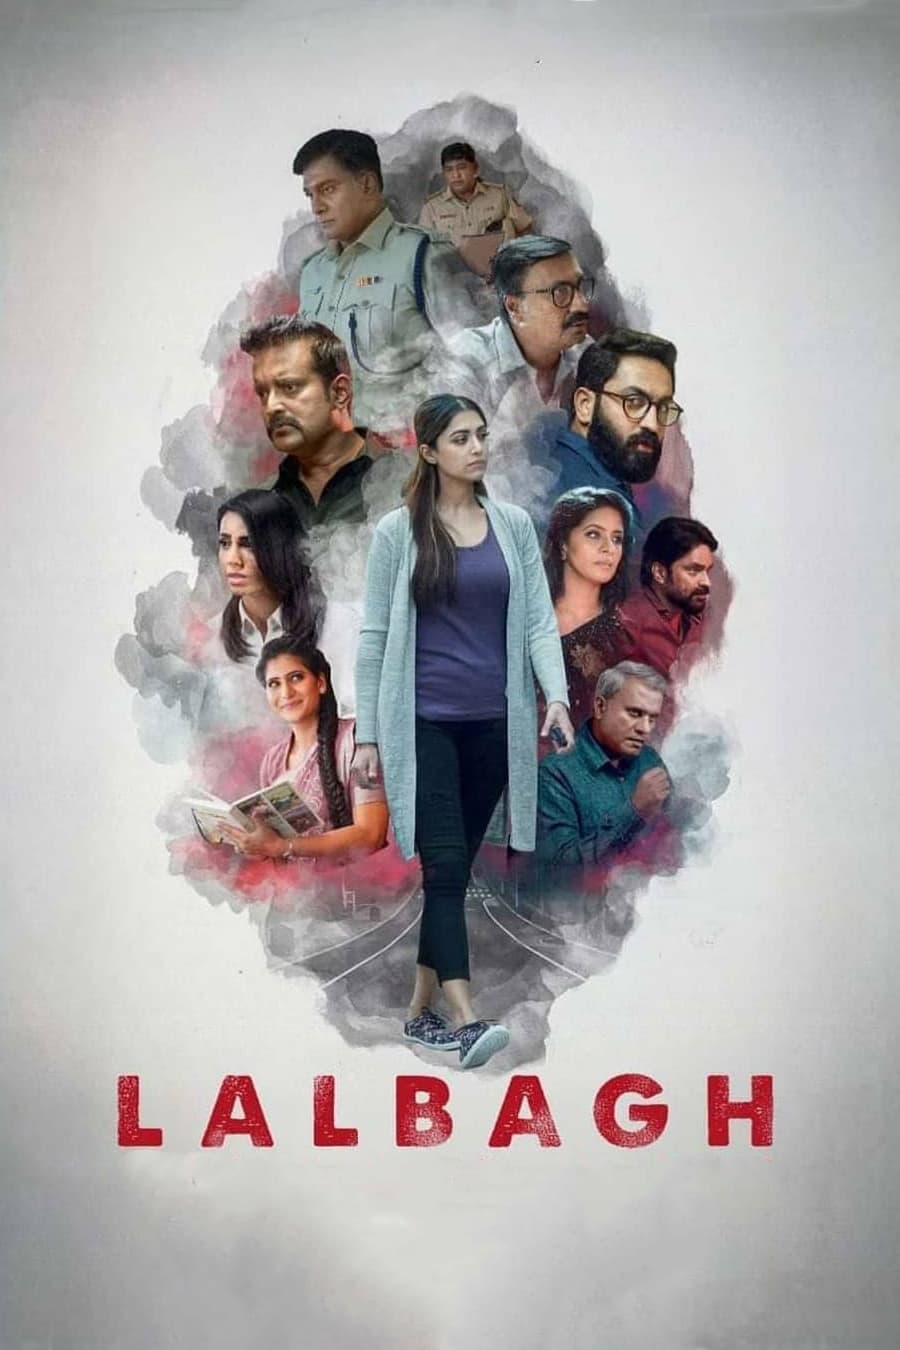 Poster for the movie "Lalbagh"